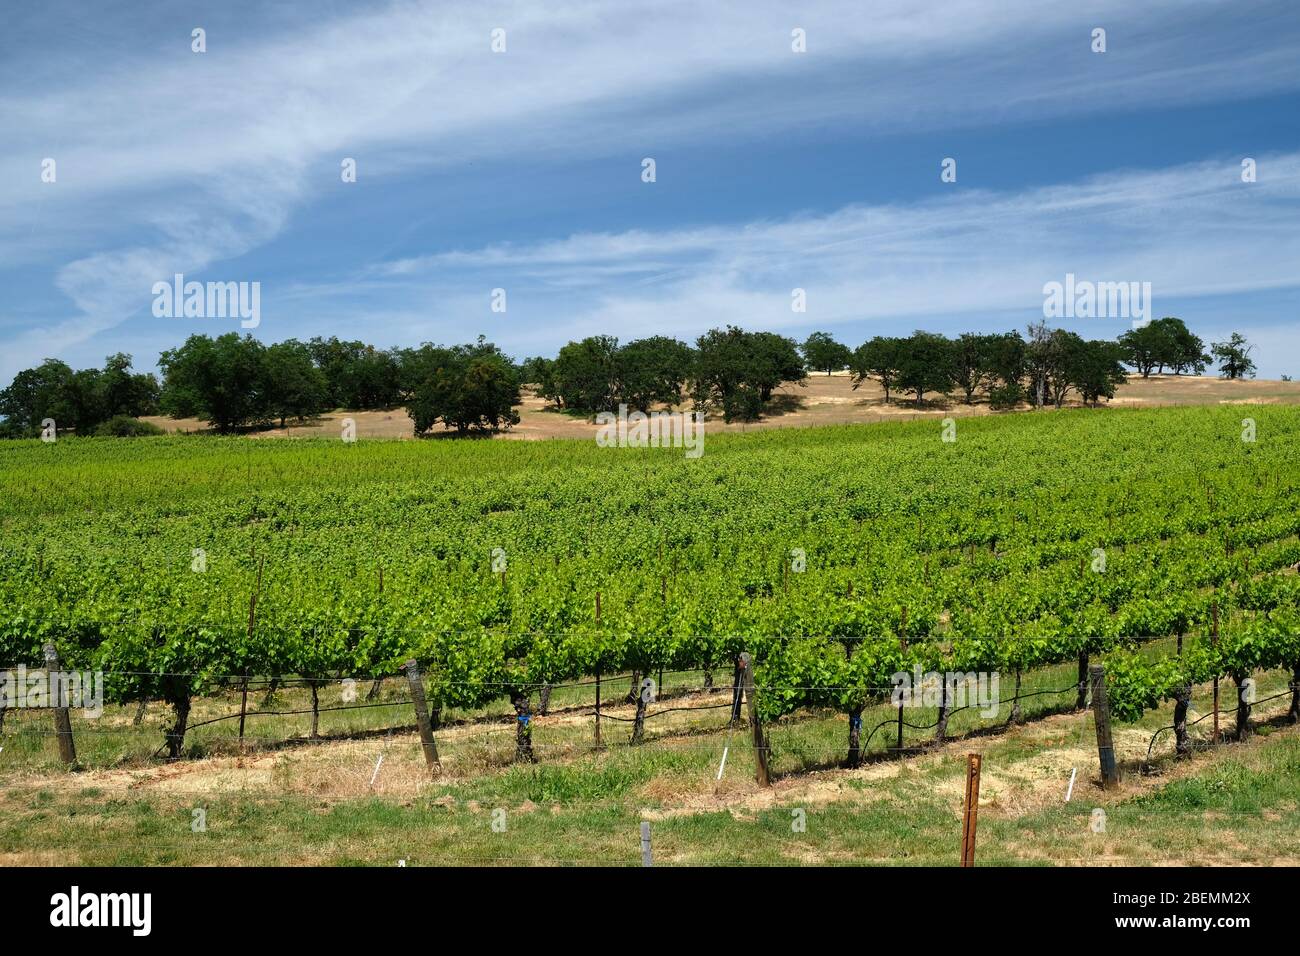 Rows of wine vines in a Rogue Valley AVA vineyard in Southern Oregon near Medford landscapes Stock Photo